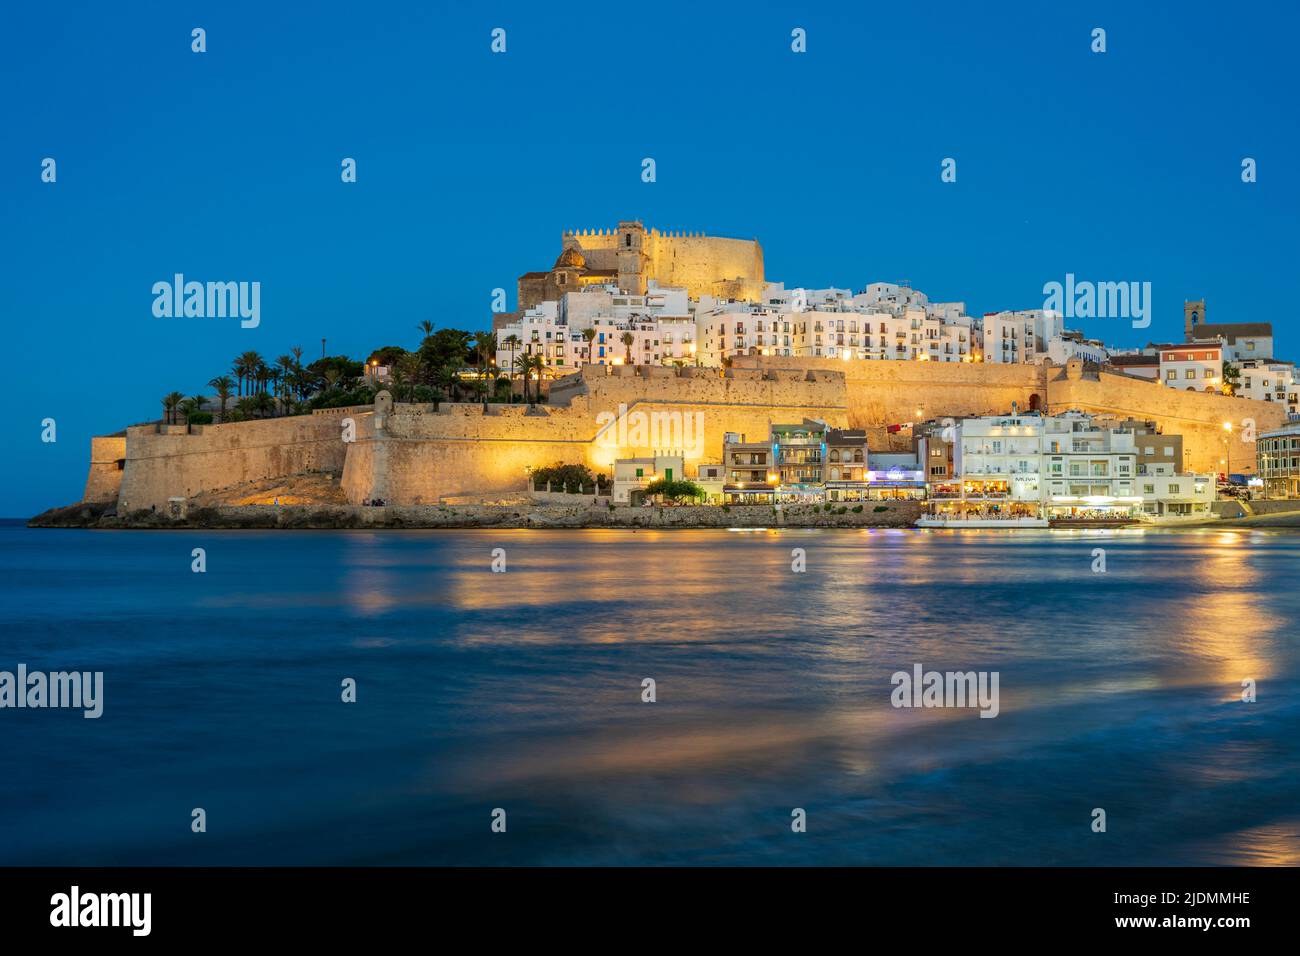 Night view of old town and Knights Templar castle, Peniscola, Valencian Community, Spain Stock Photo